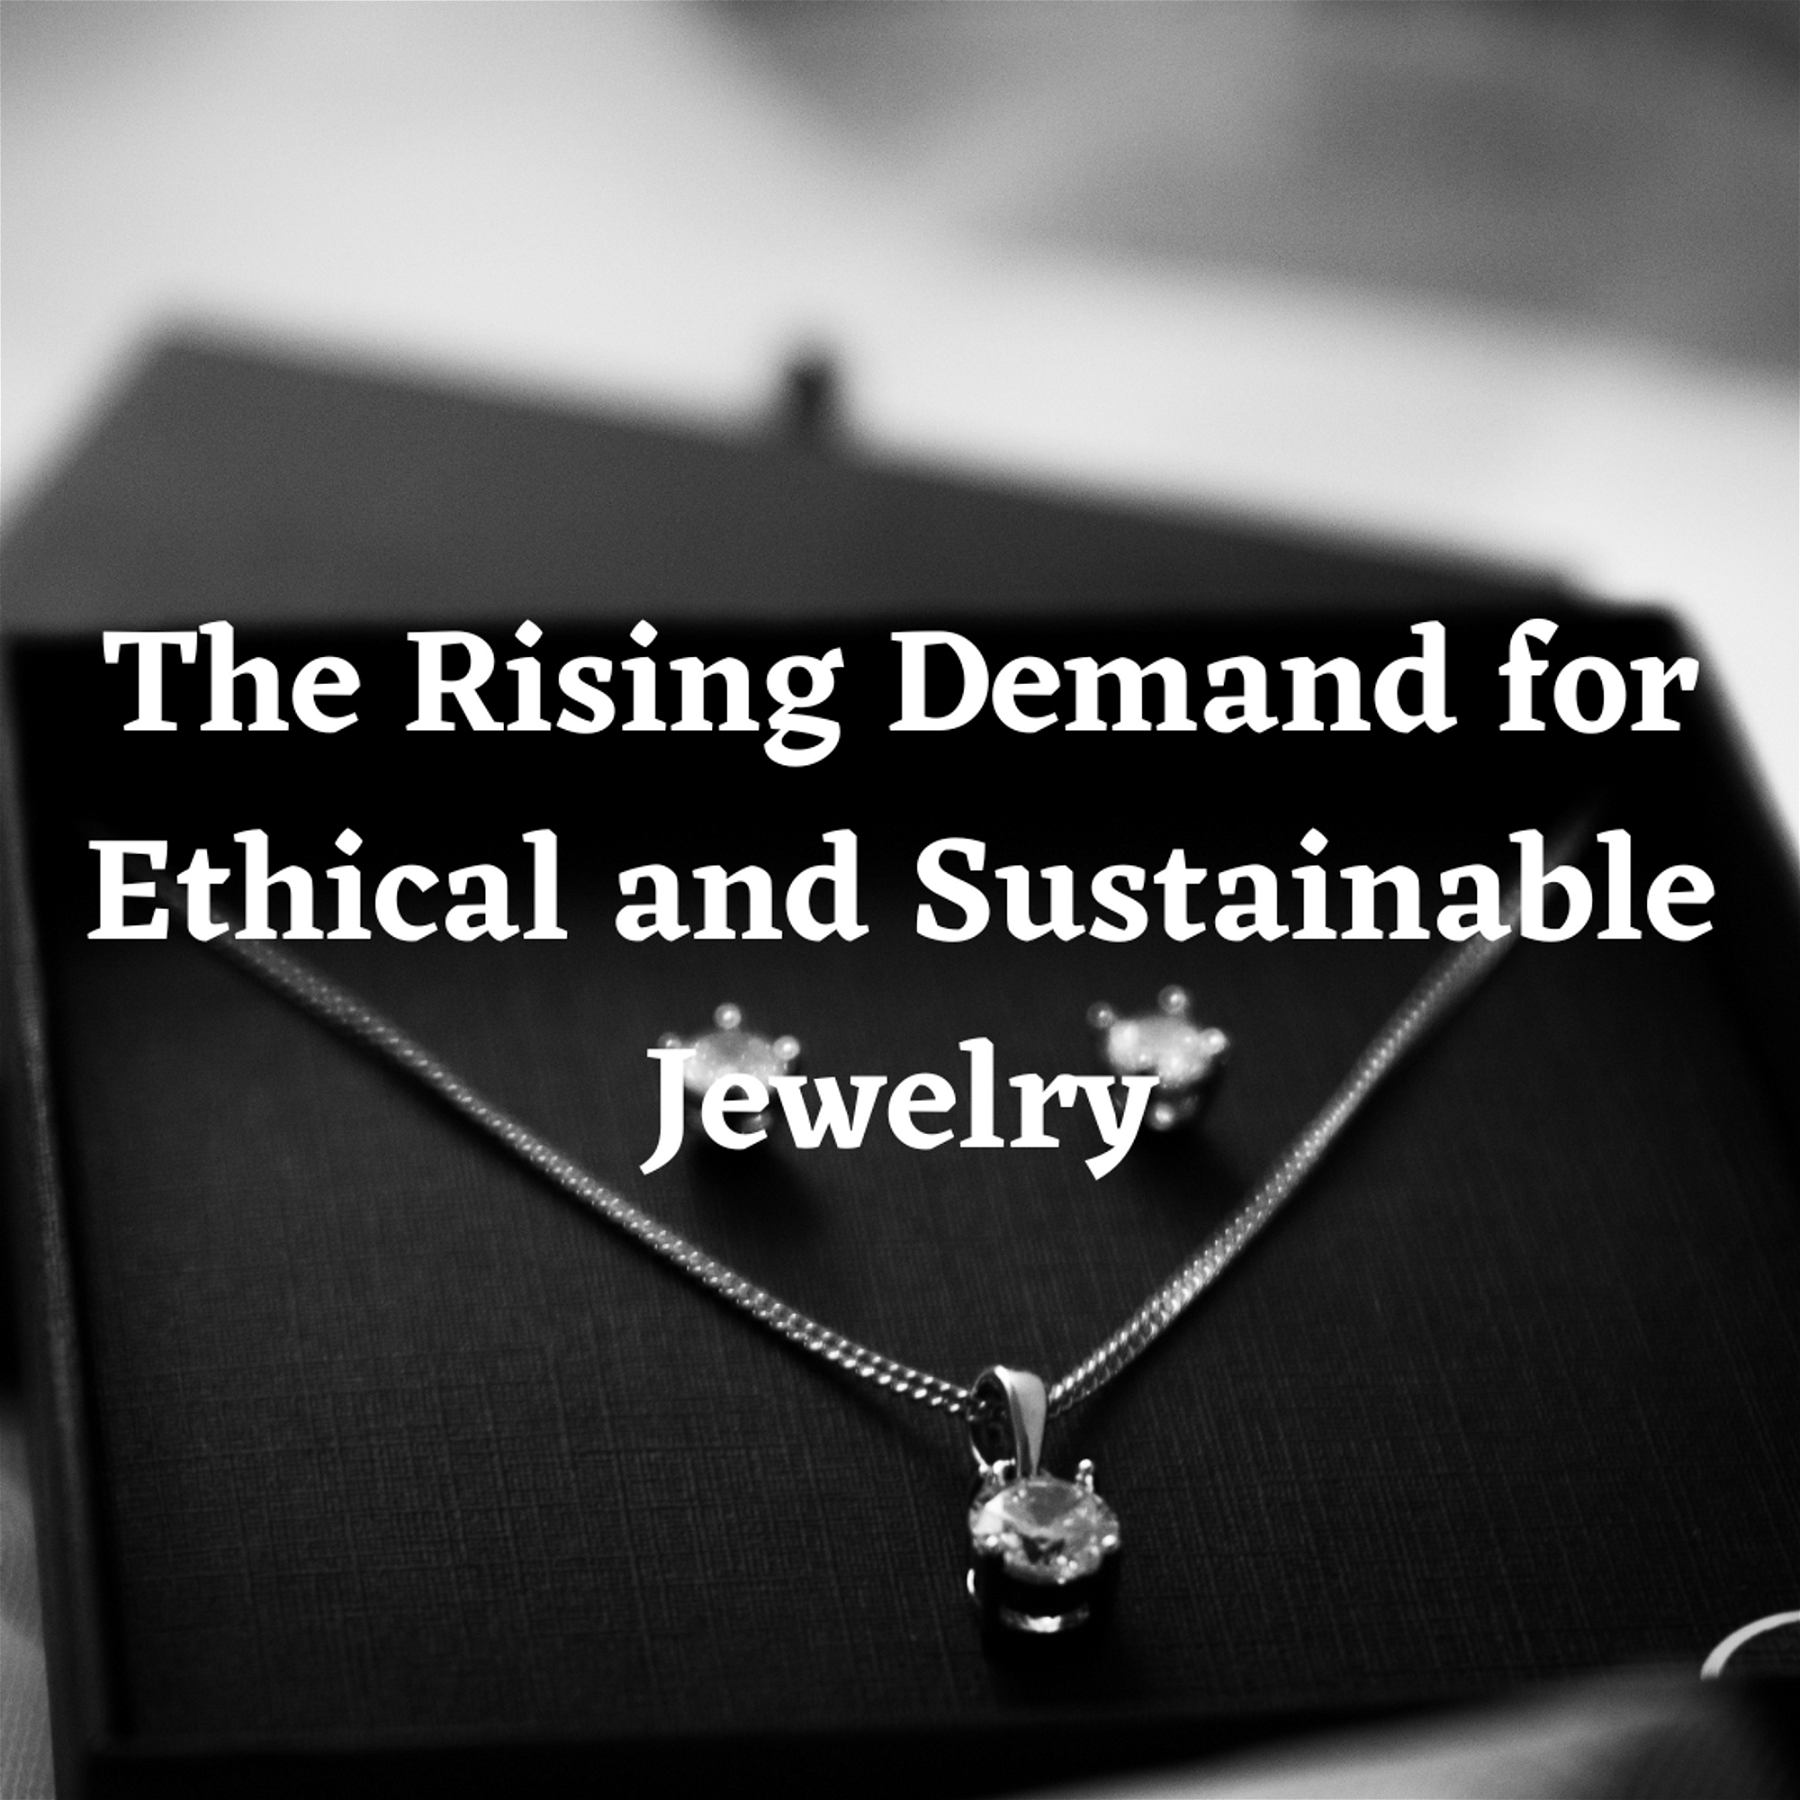 Sparkling Sustainability: The Rising Demand for Ethical and Sustainable Jewelry